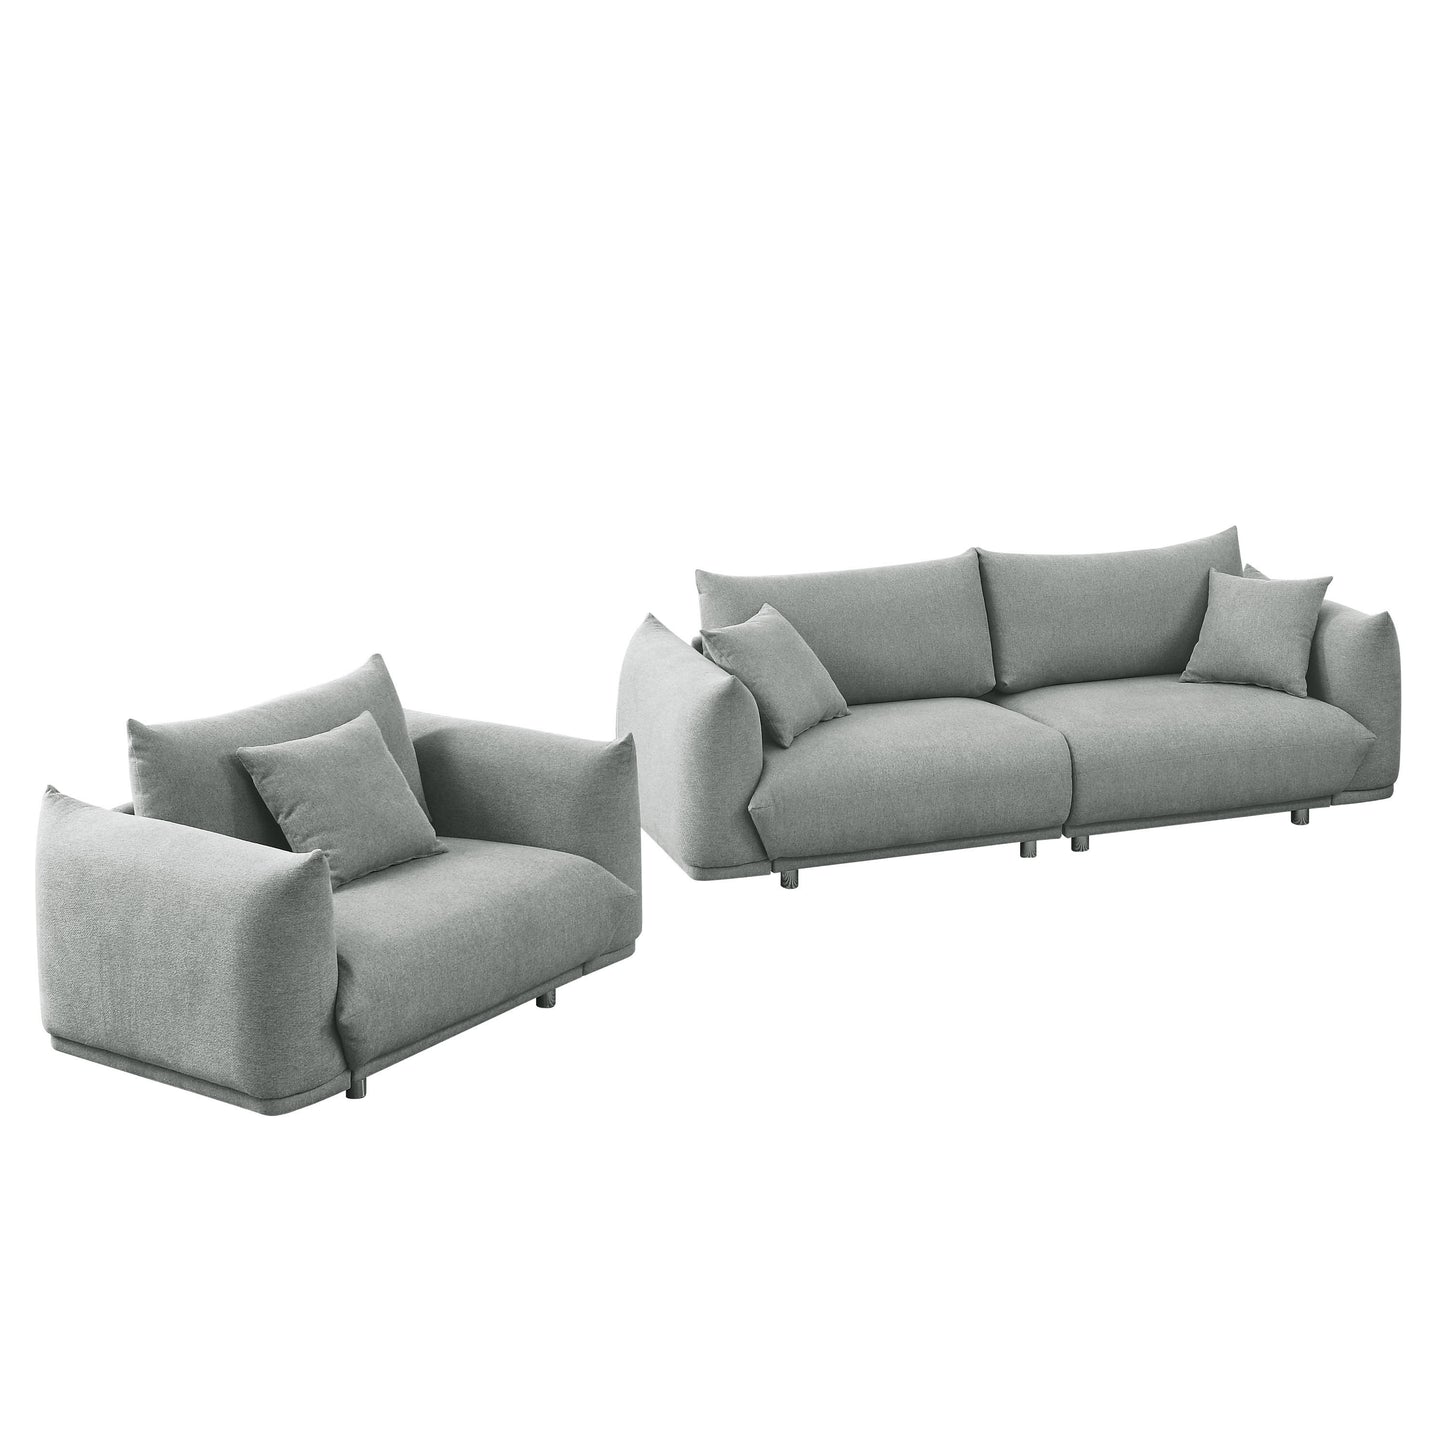 3-seater + 1-seater combination sofa Modern Couch for Living Room Sofa,Solid Wood Frame and Stable Metal Legs, 3 Pillows, Sofa Furniture for Apartment